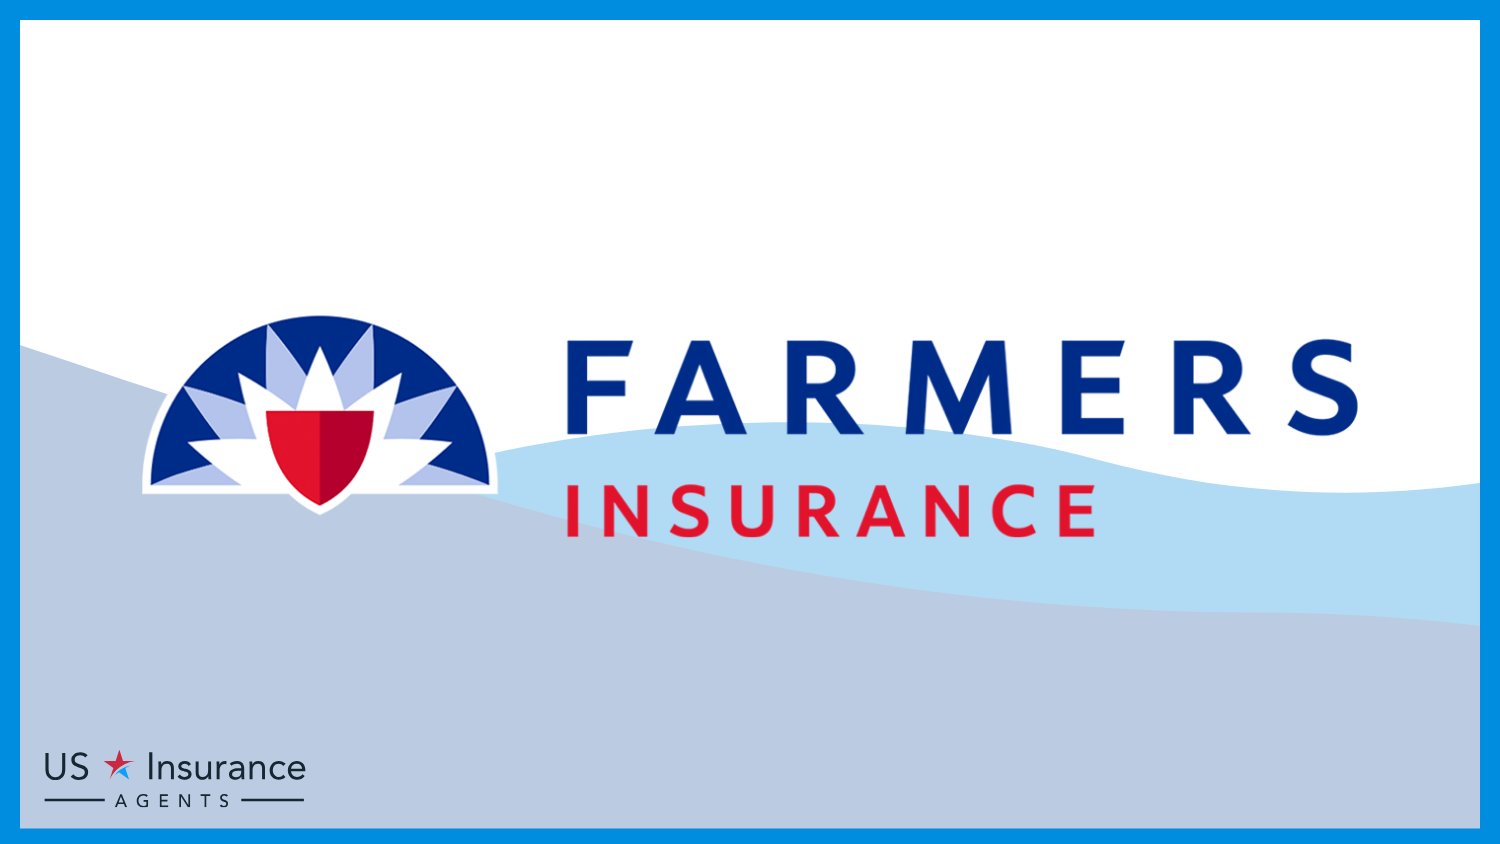 US-Insurance-Agents-Featured-Provider-Images-Farmers-Insurance-Agents-Featured-Provider-Images-Farmers 